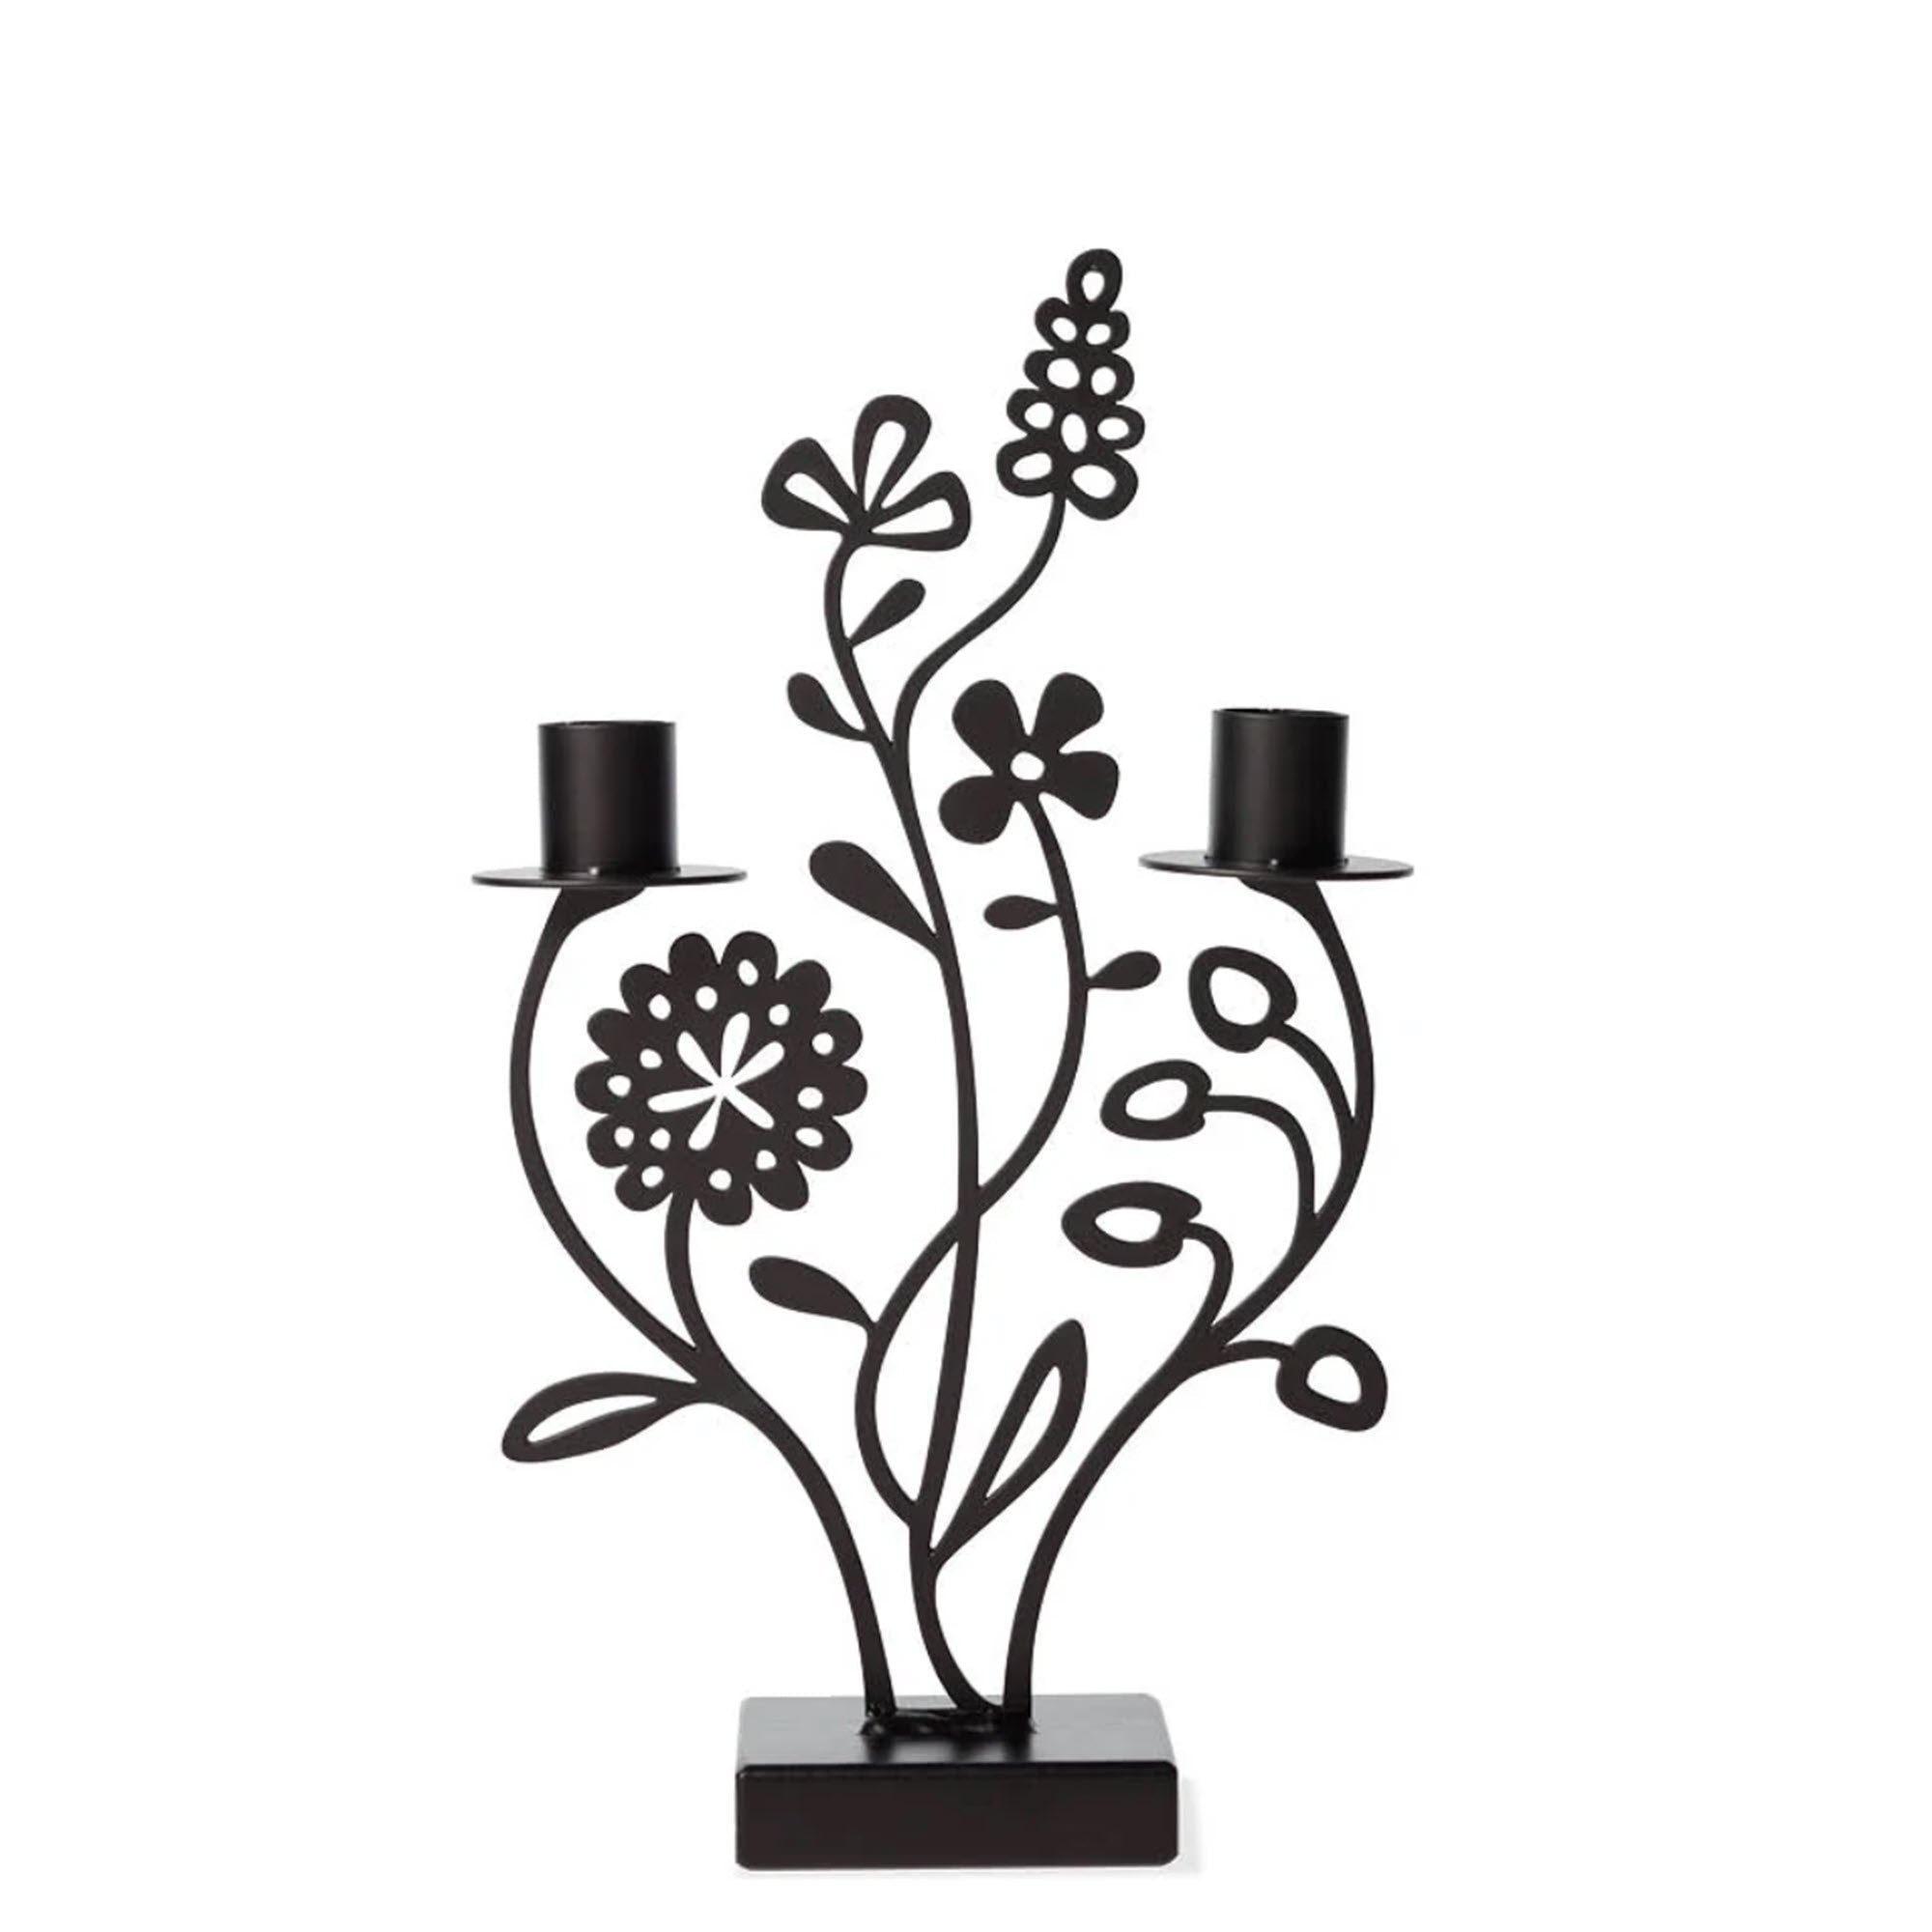 An enchanting candle holder crafted from sleek black iron, resembling a charming flower meadow. Featuring two taper candle holders atop a sturdy iron platform, adorned with four intricately detailed flowers and delicate leaves, evoking a sense of whimsical elegance.